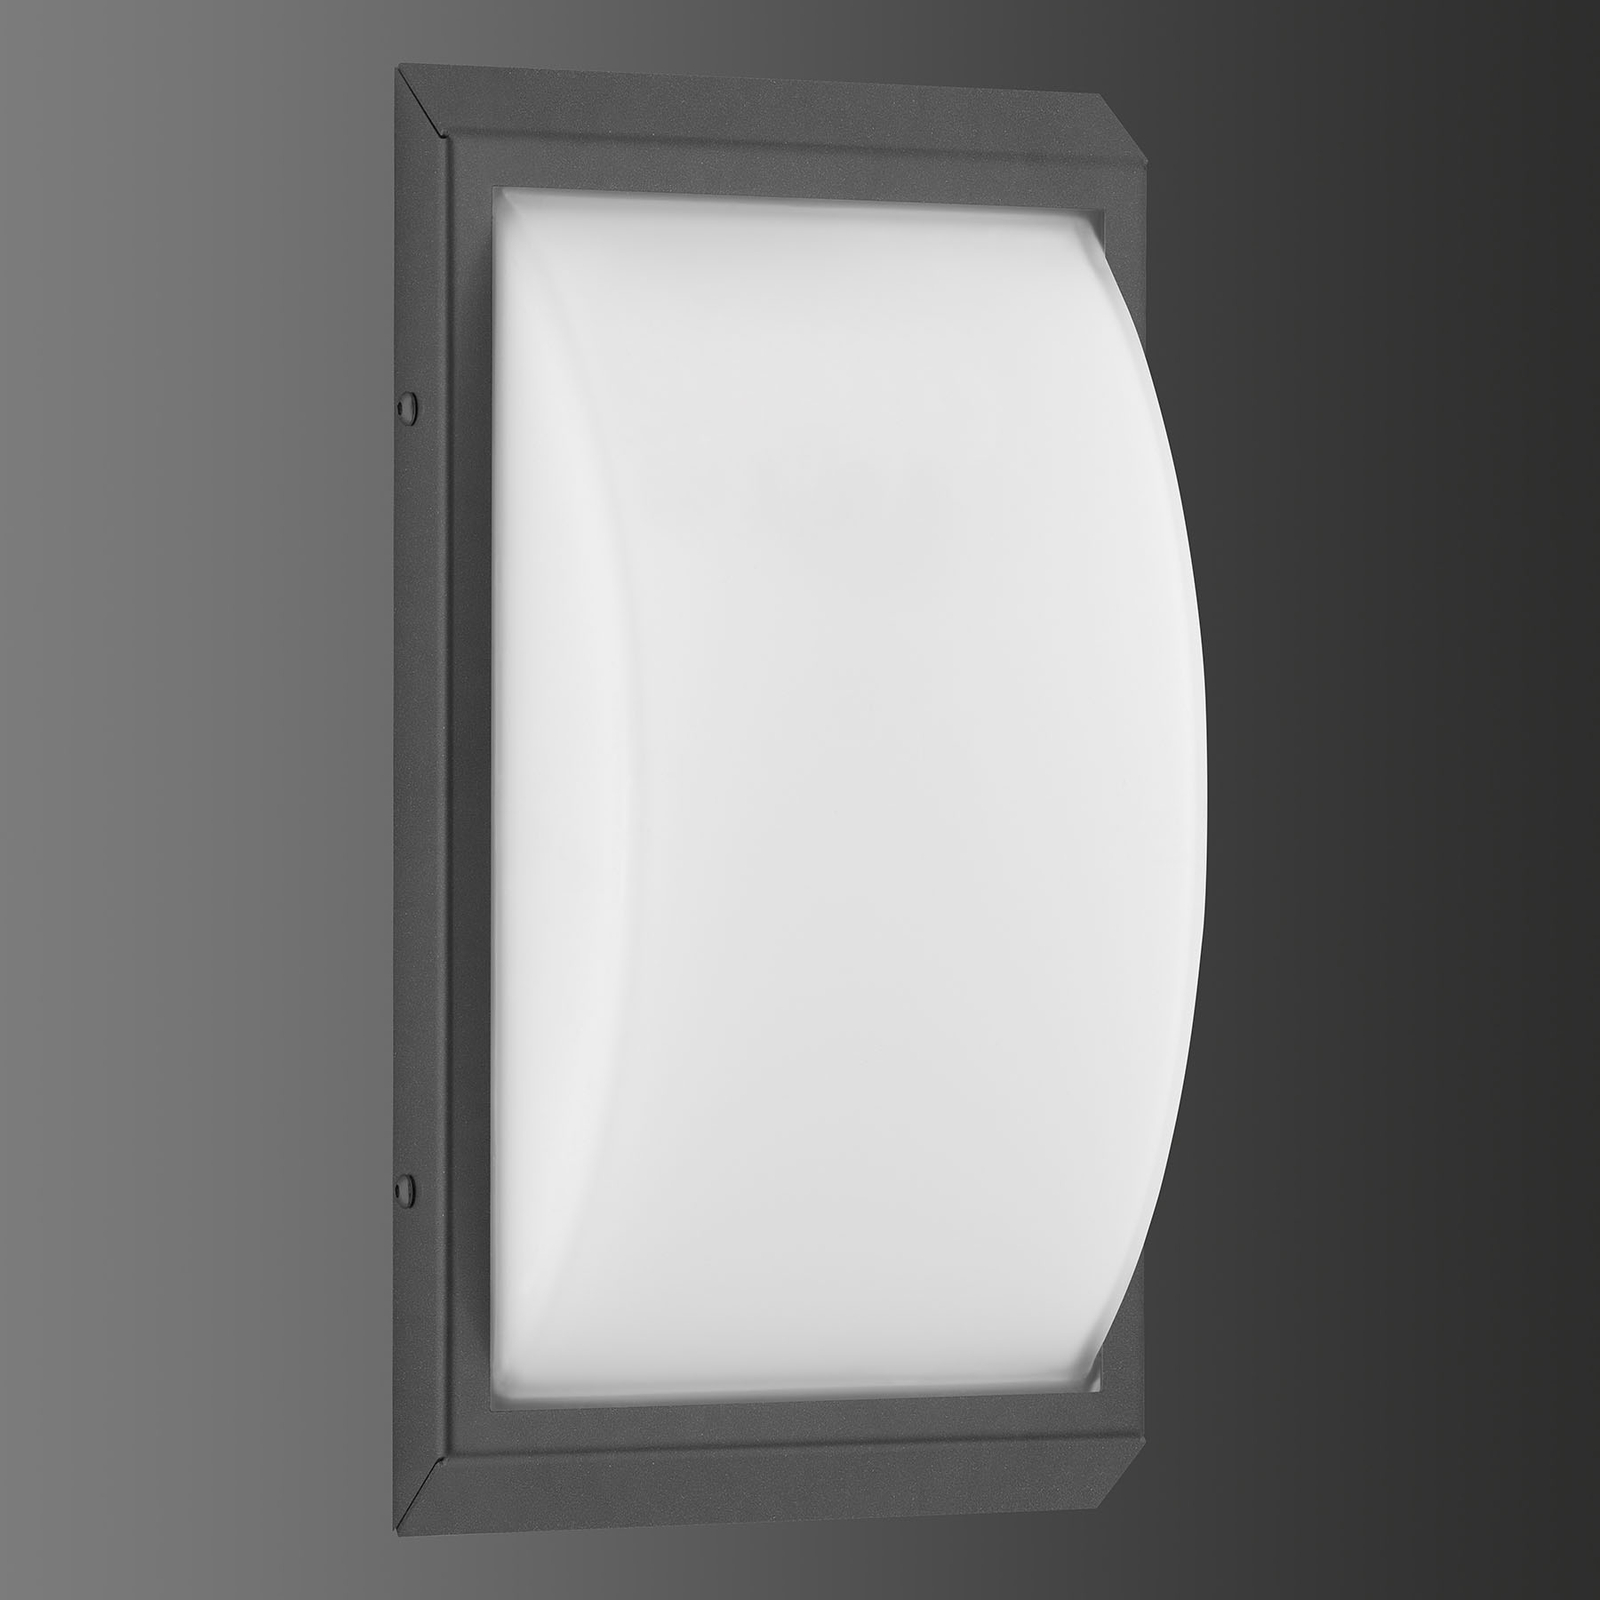 053 LED outdoor wall lamp stainless steel graphite